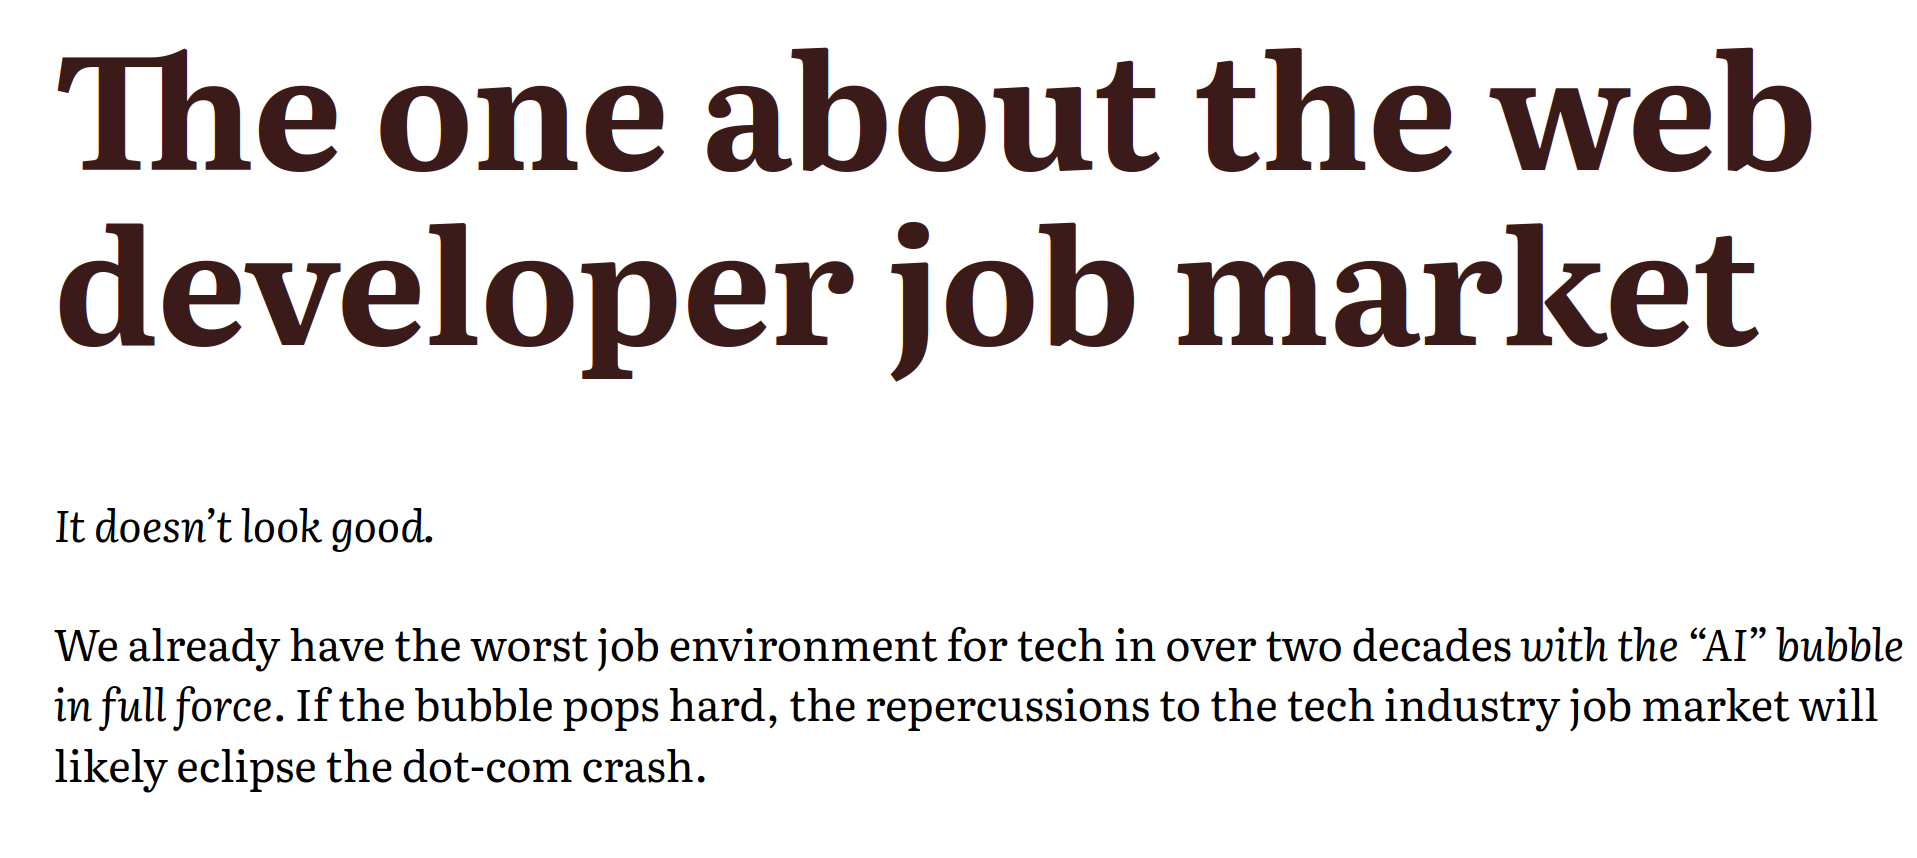 A screenshot of an upcoming blog post. The text reads: "The one about the web developer job market.  It doesn’t look good.  We already have the worst job environment for tech in over two decades with the “AI” bubble in full force. If the bubble pops hard, the repercussions to the tech industry job market will likely eclipse the dot-com crash."